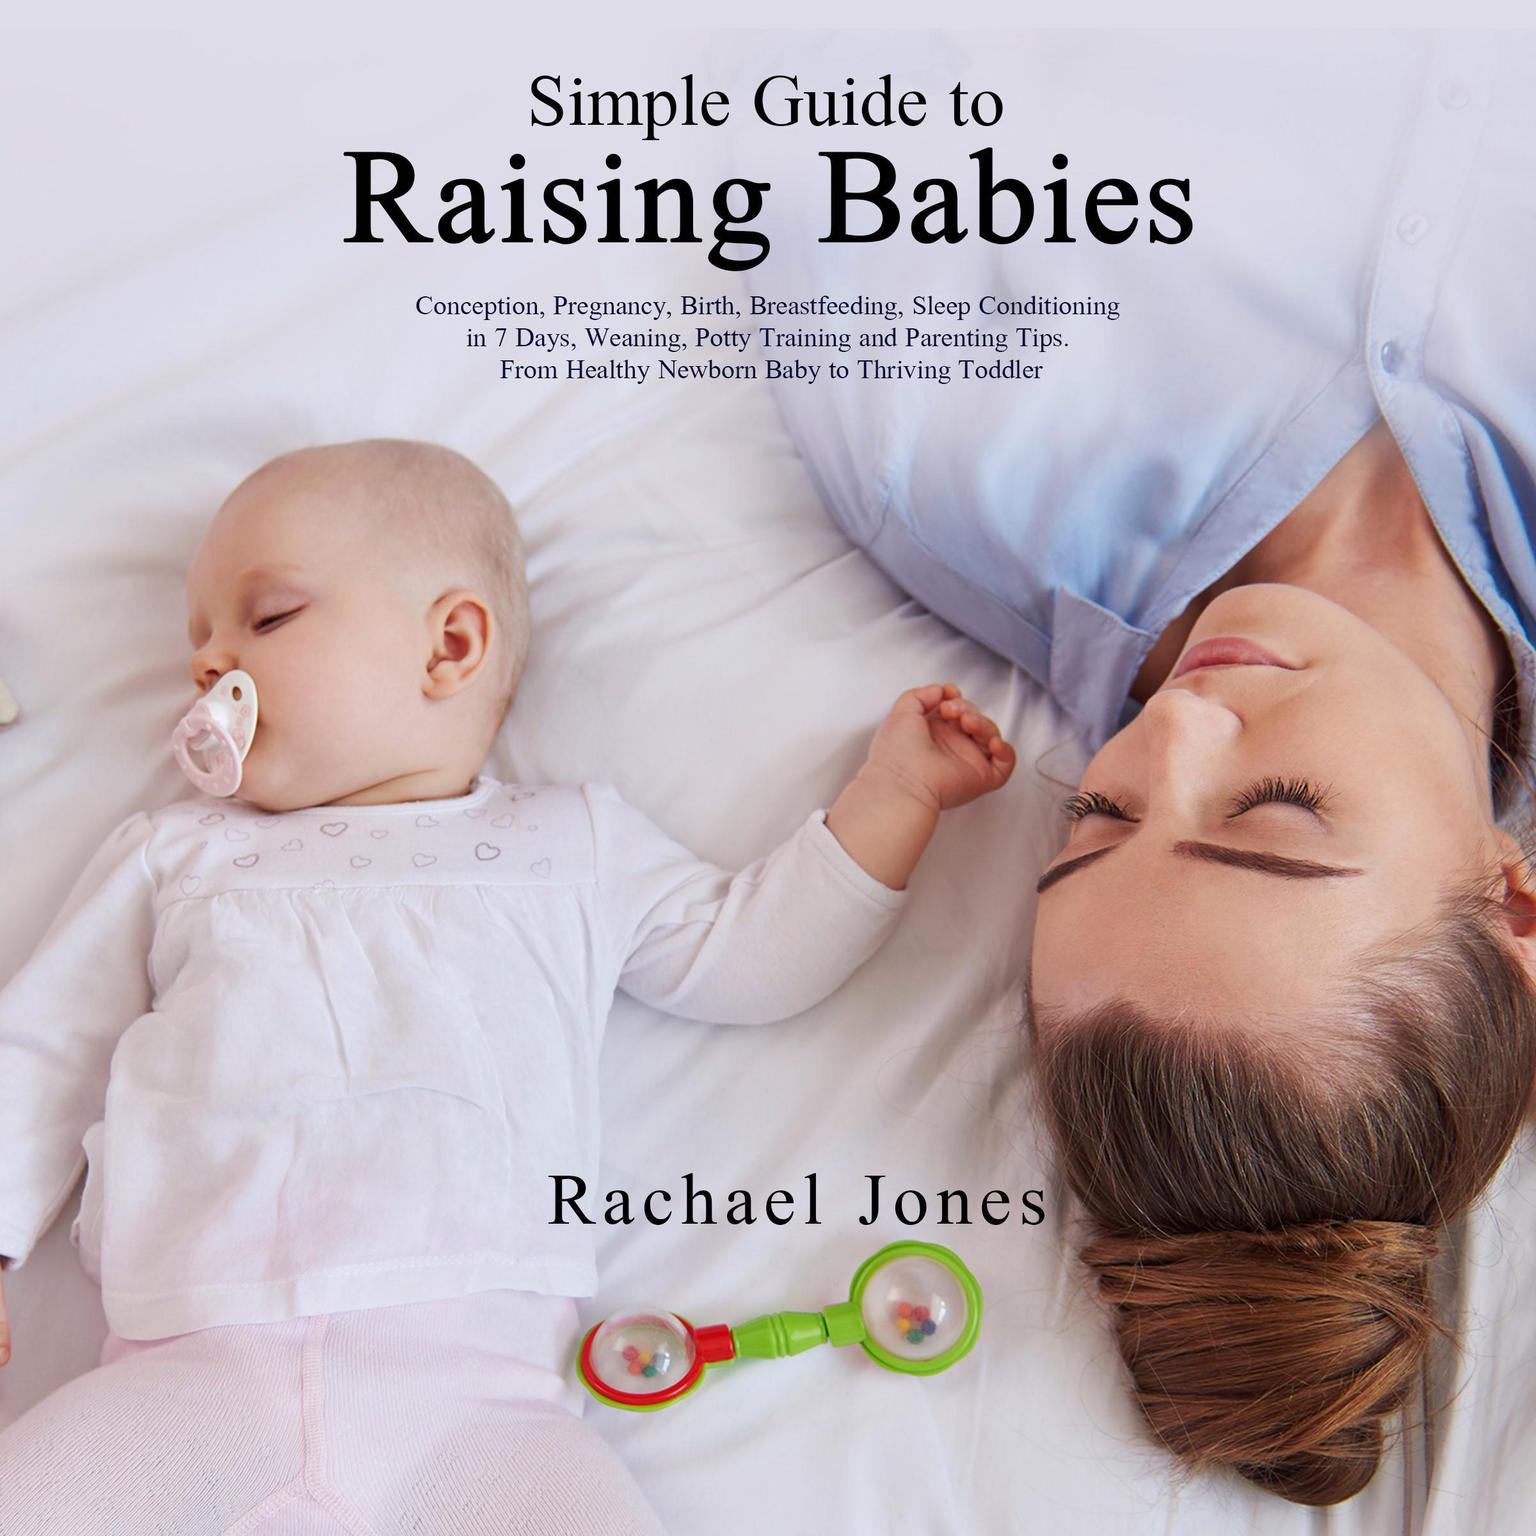 Simple Guide to Raising Babies: Conception, Pregnancy, Birth, Breastfeeding, Sleep Conditioning in 7 Days, Weaning, Potty Training and Parenting Tips. From Healthy Newborn Baby to Thriving Toddler. Audiobook, by Rachael Jones